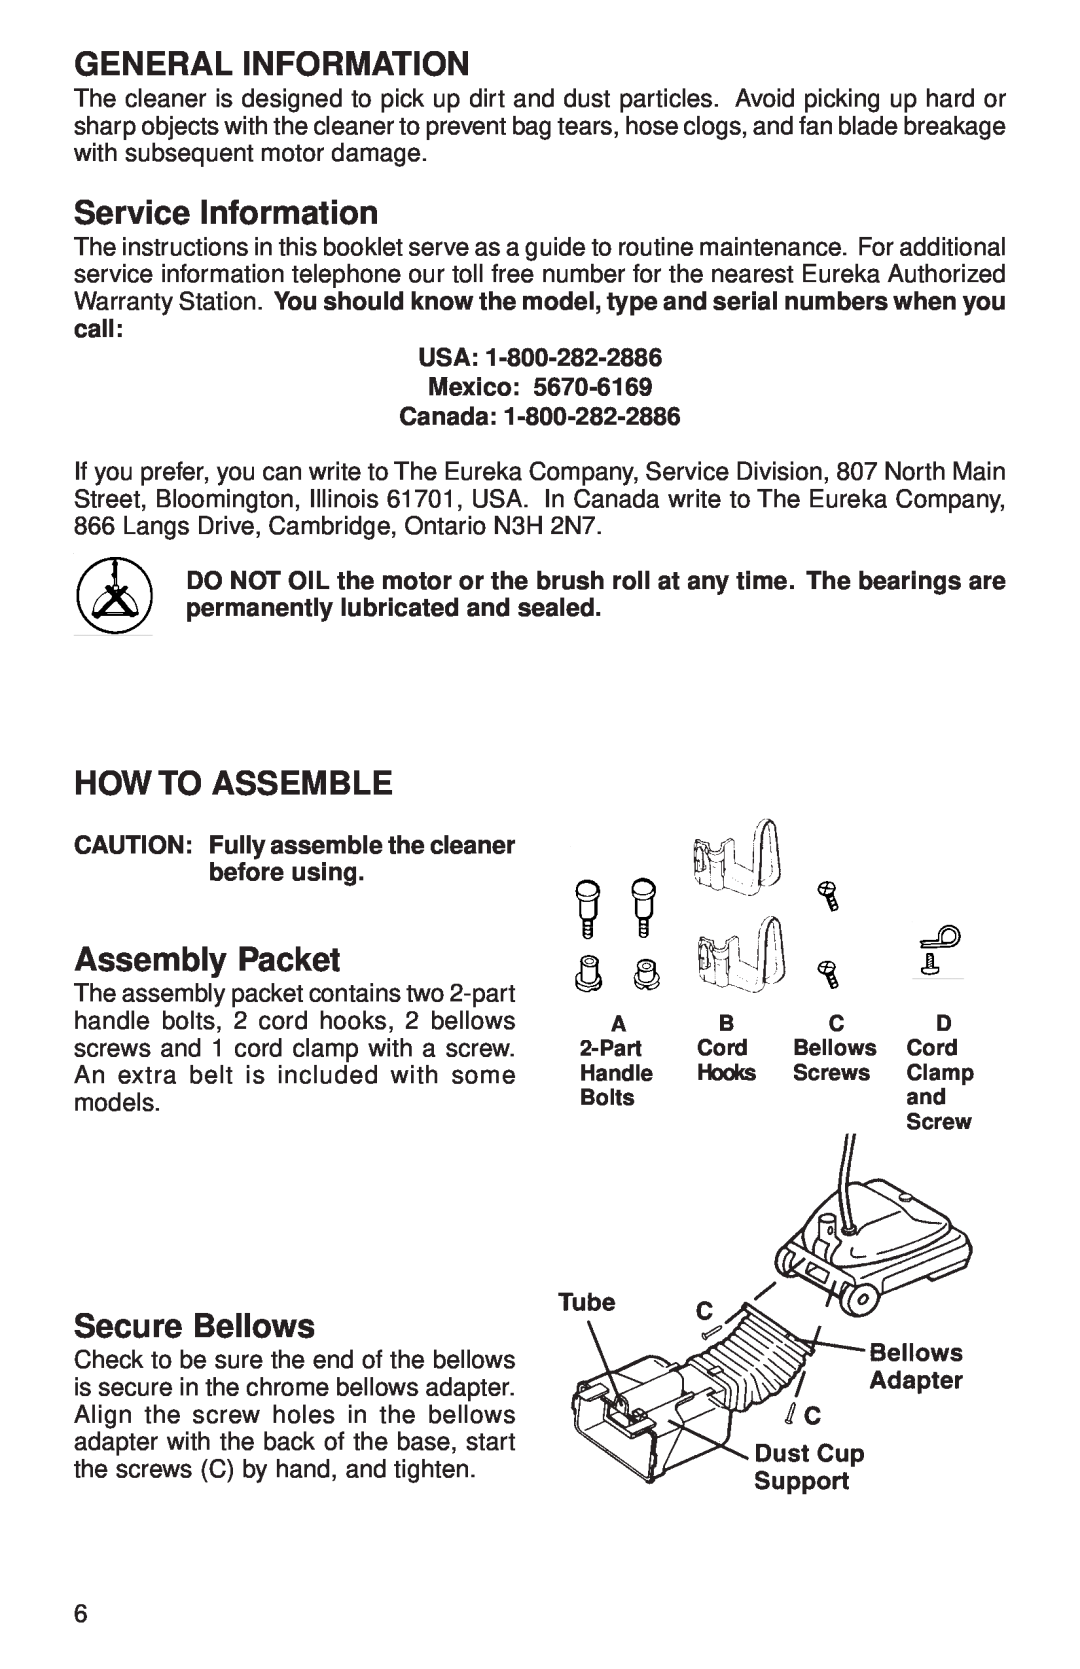 Sanitaire 680 Series warranty General Information, Service Information, How To Assemble, Assembly Packet, Secure Bellows 